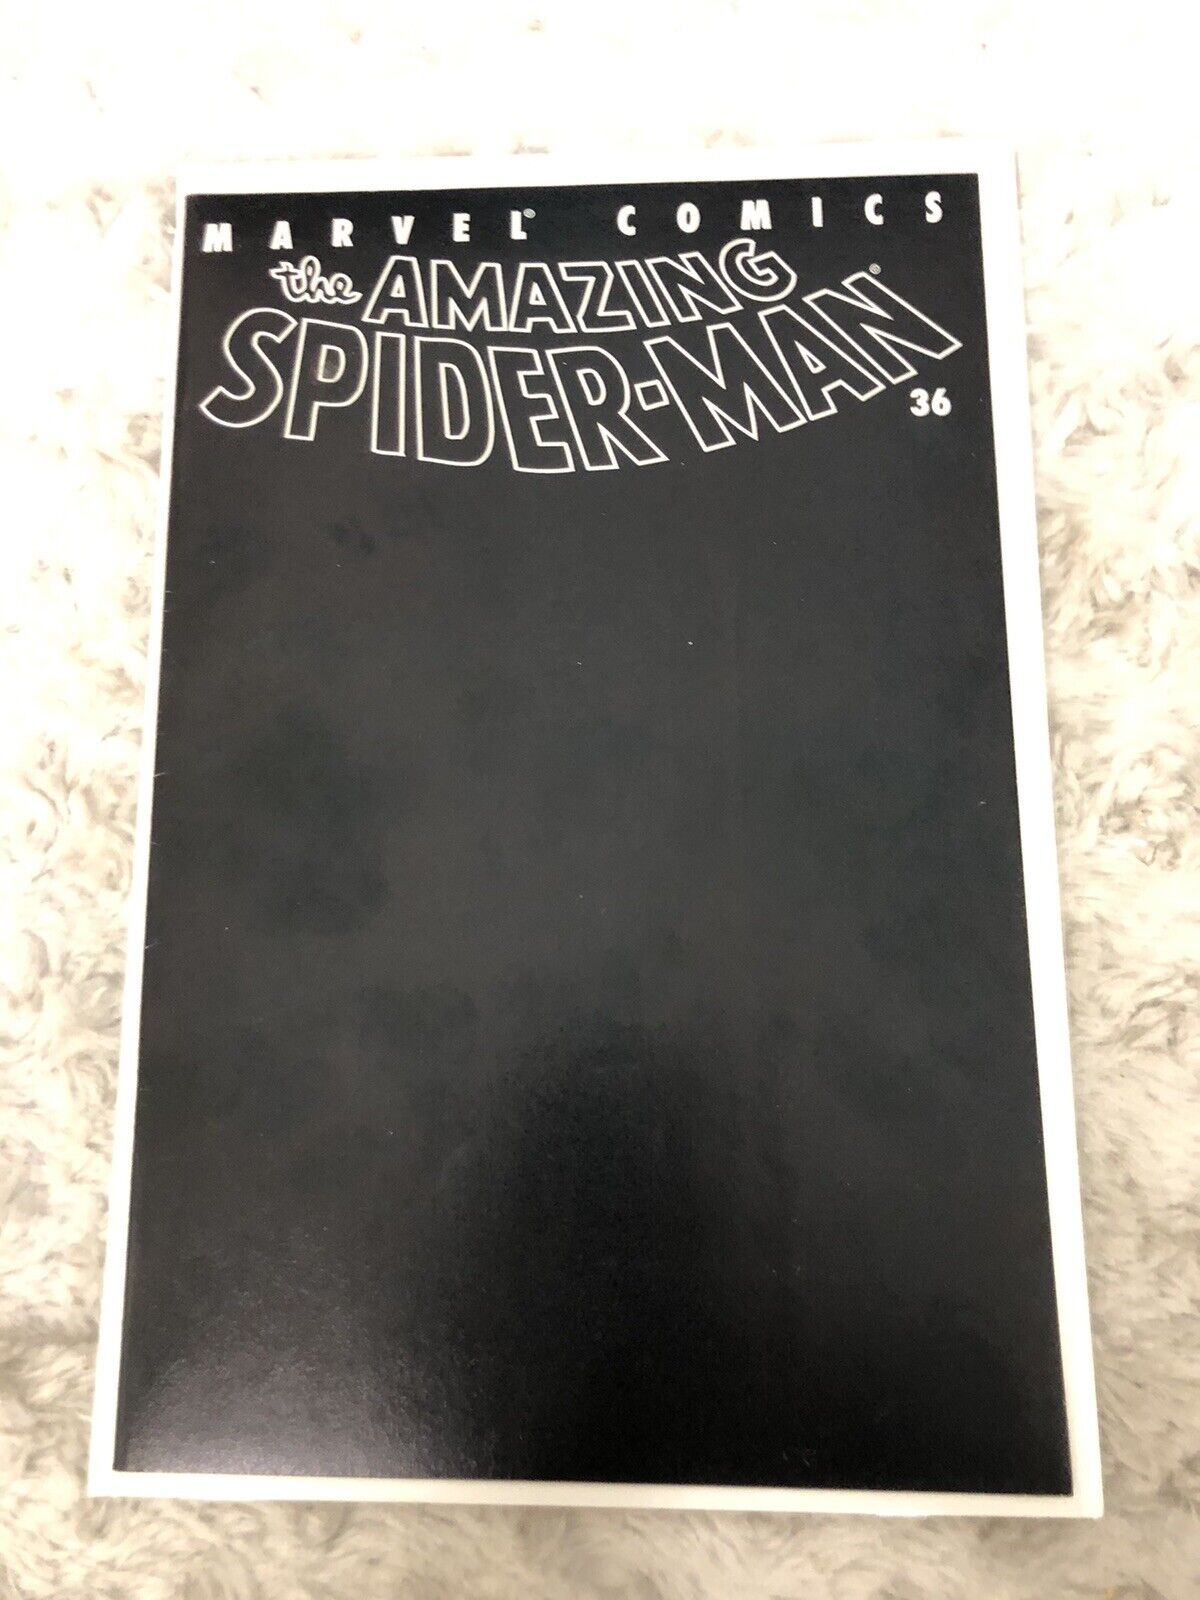 Amazing Spider-Man (1999) #36 Black Cover Sept 11/9-11 Tribute Issue VF/NM